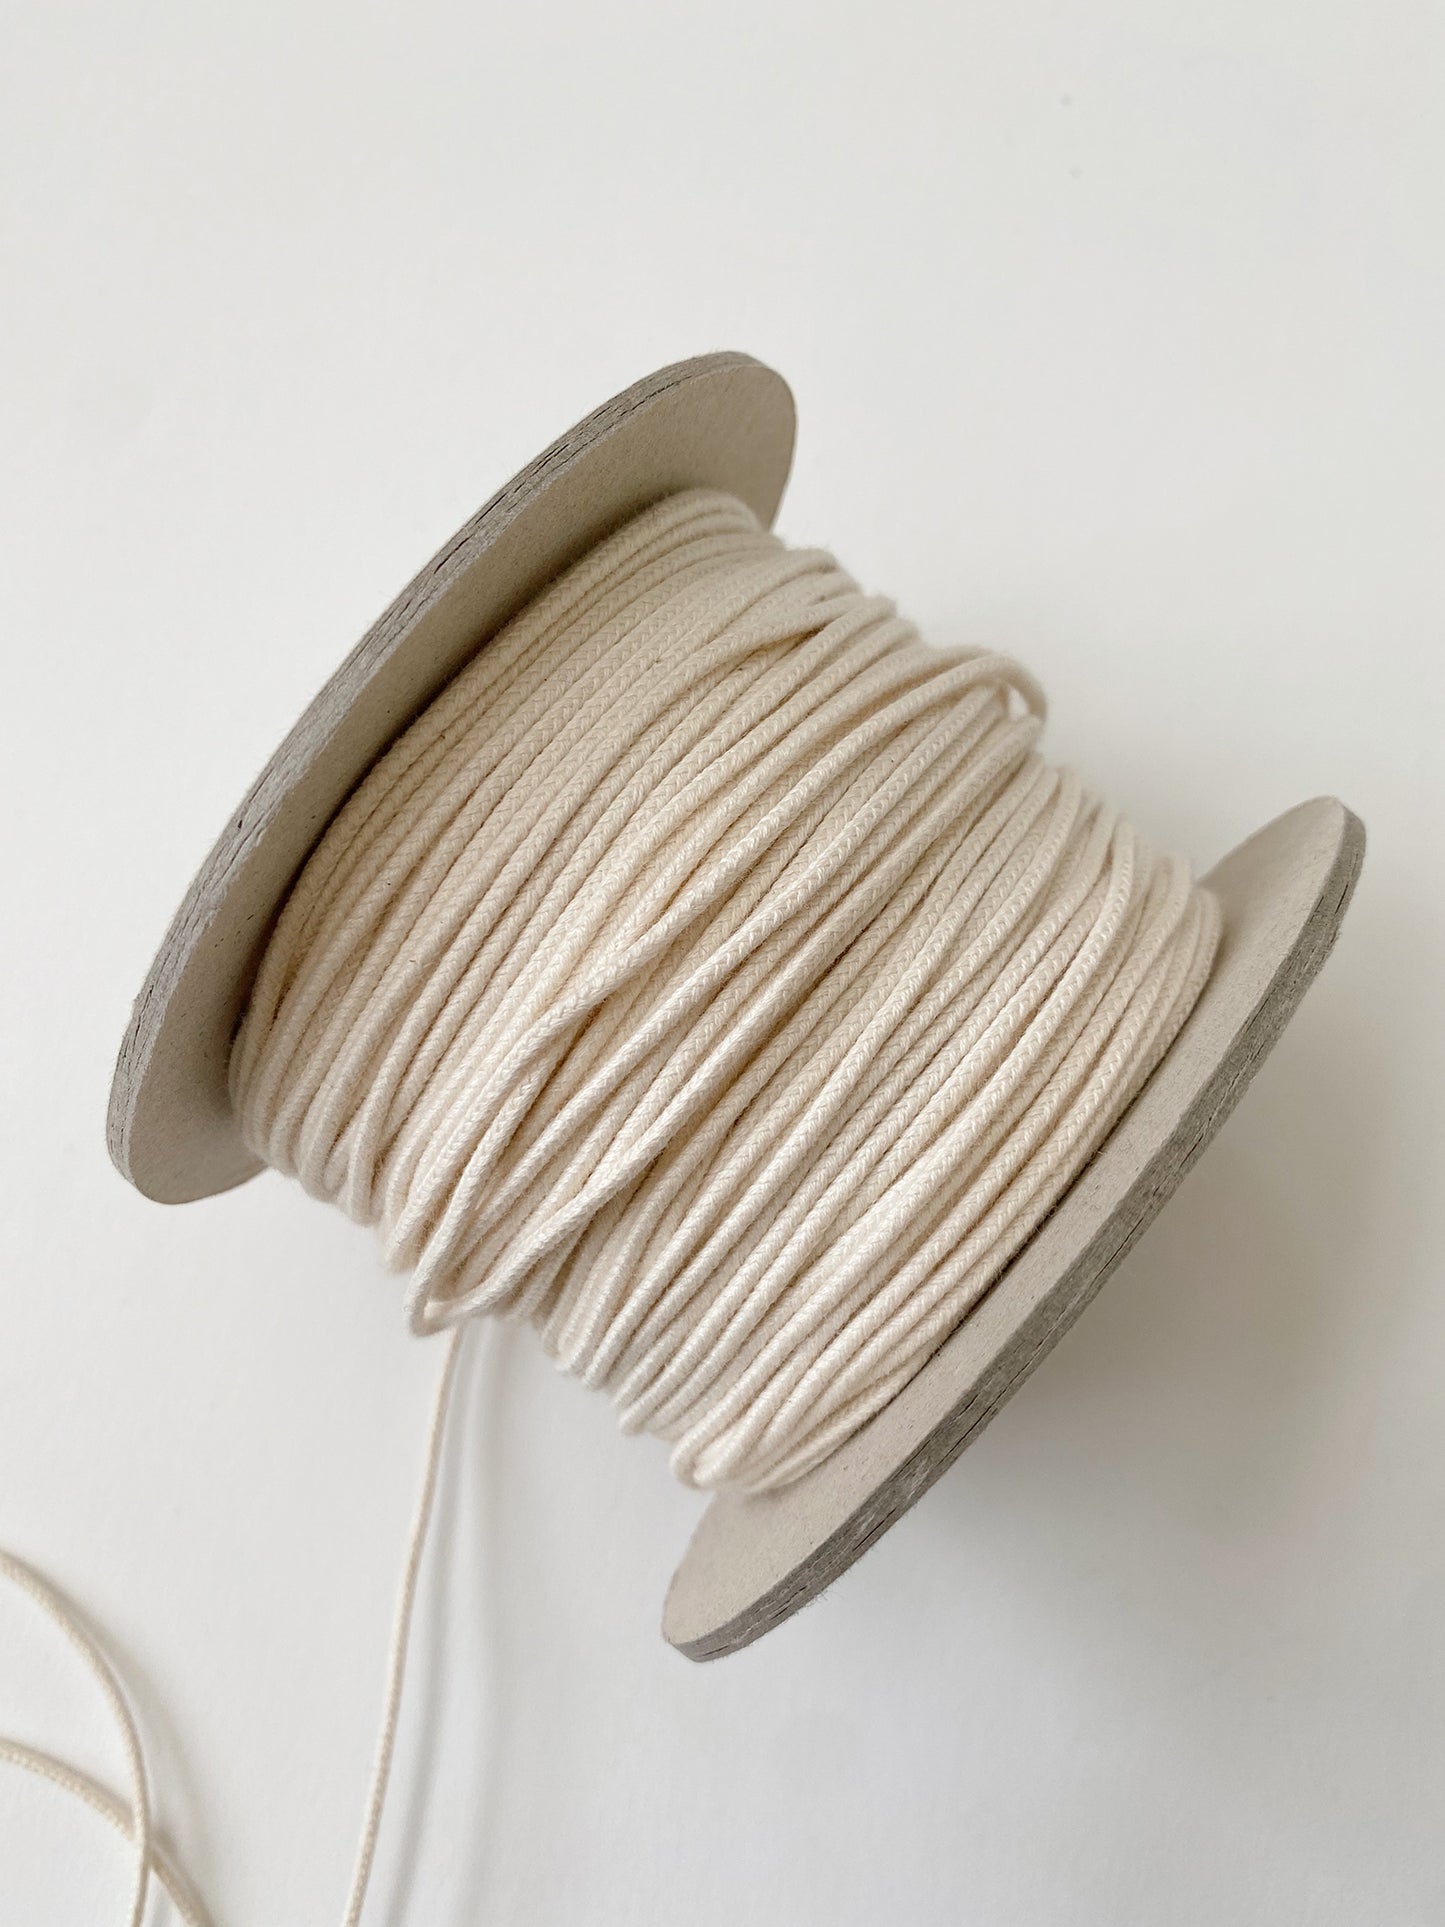 2mm 3mm 5mm 6mm Flat Cotton Tape Braid Thin String Cord Organic  Biodegradable Environmentally Friendly by Kalsi Cords UK Made in Britain 